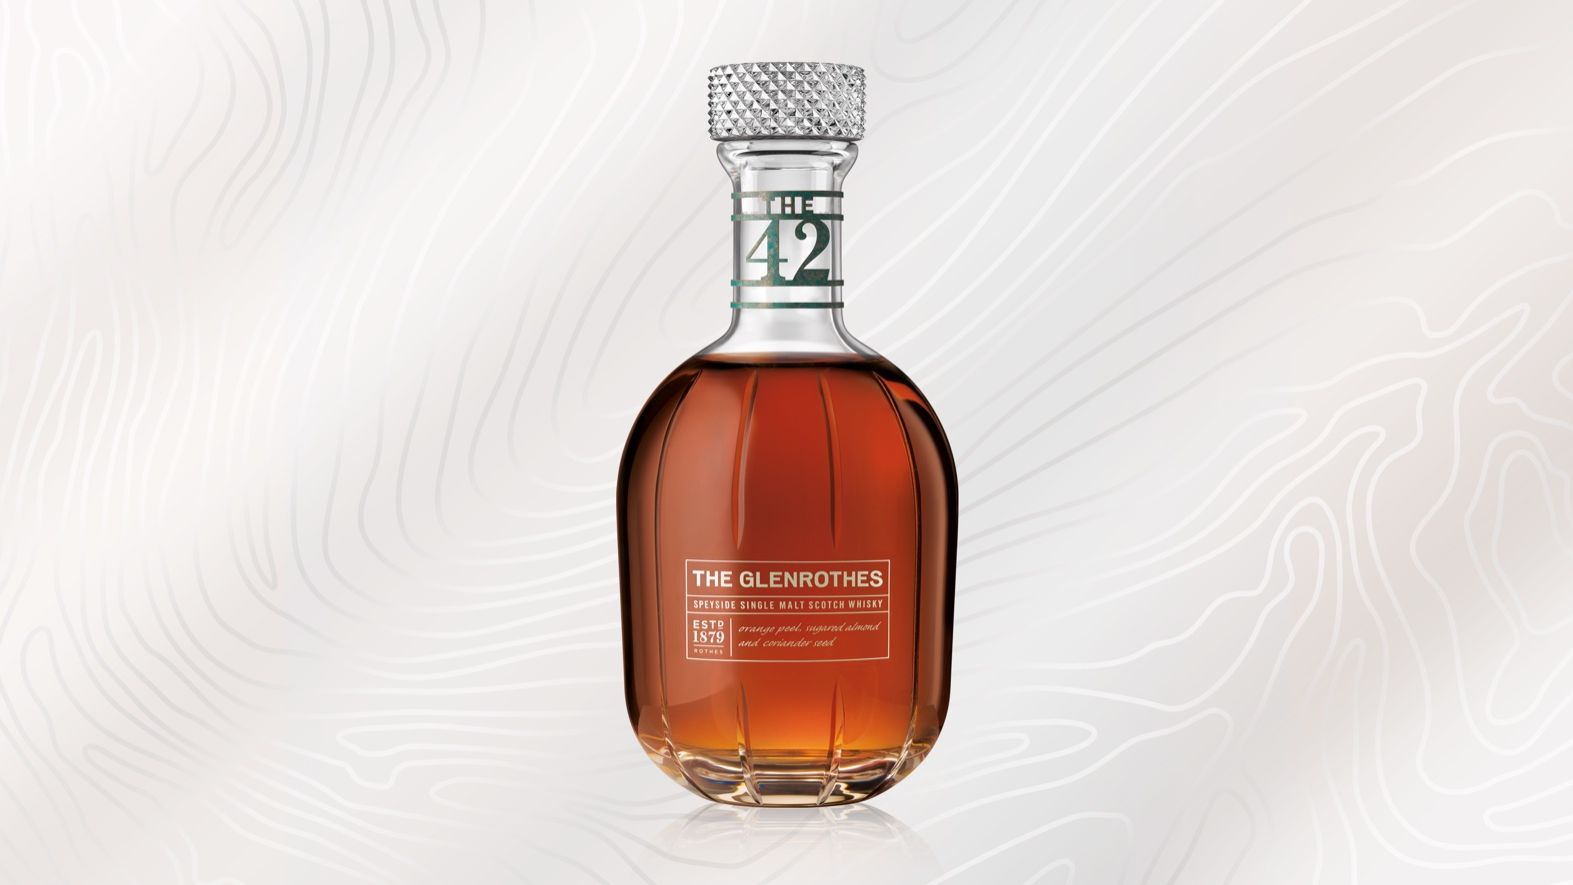 Lewis Moberly Takes A Bold And Intricate Approach For New Prestigious Whisky